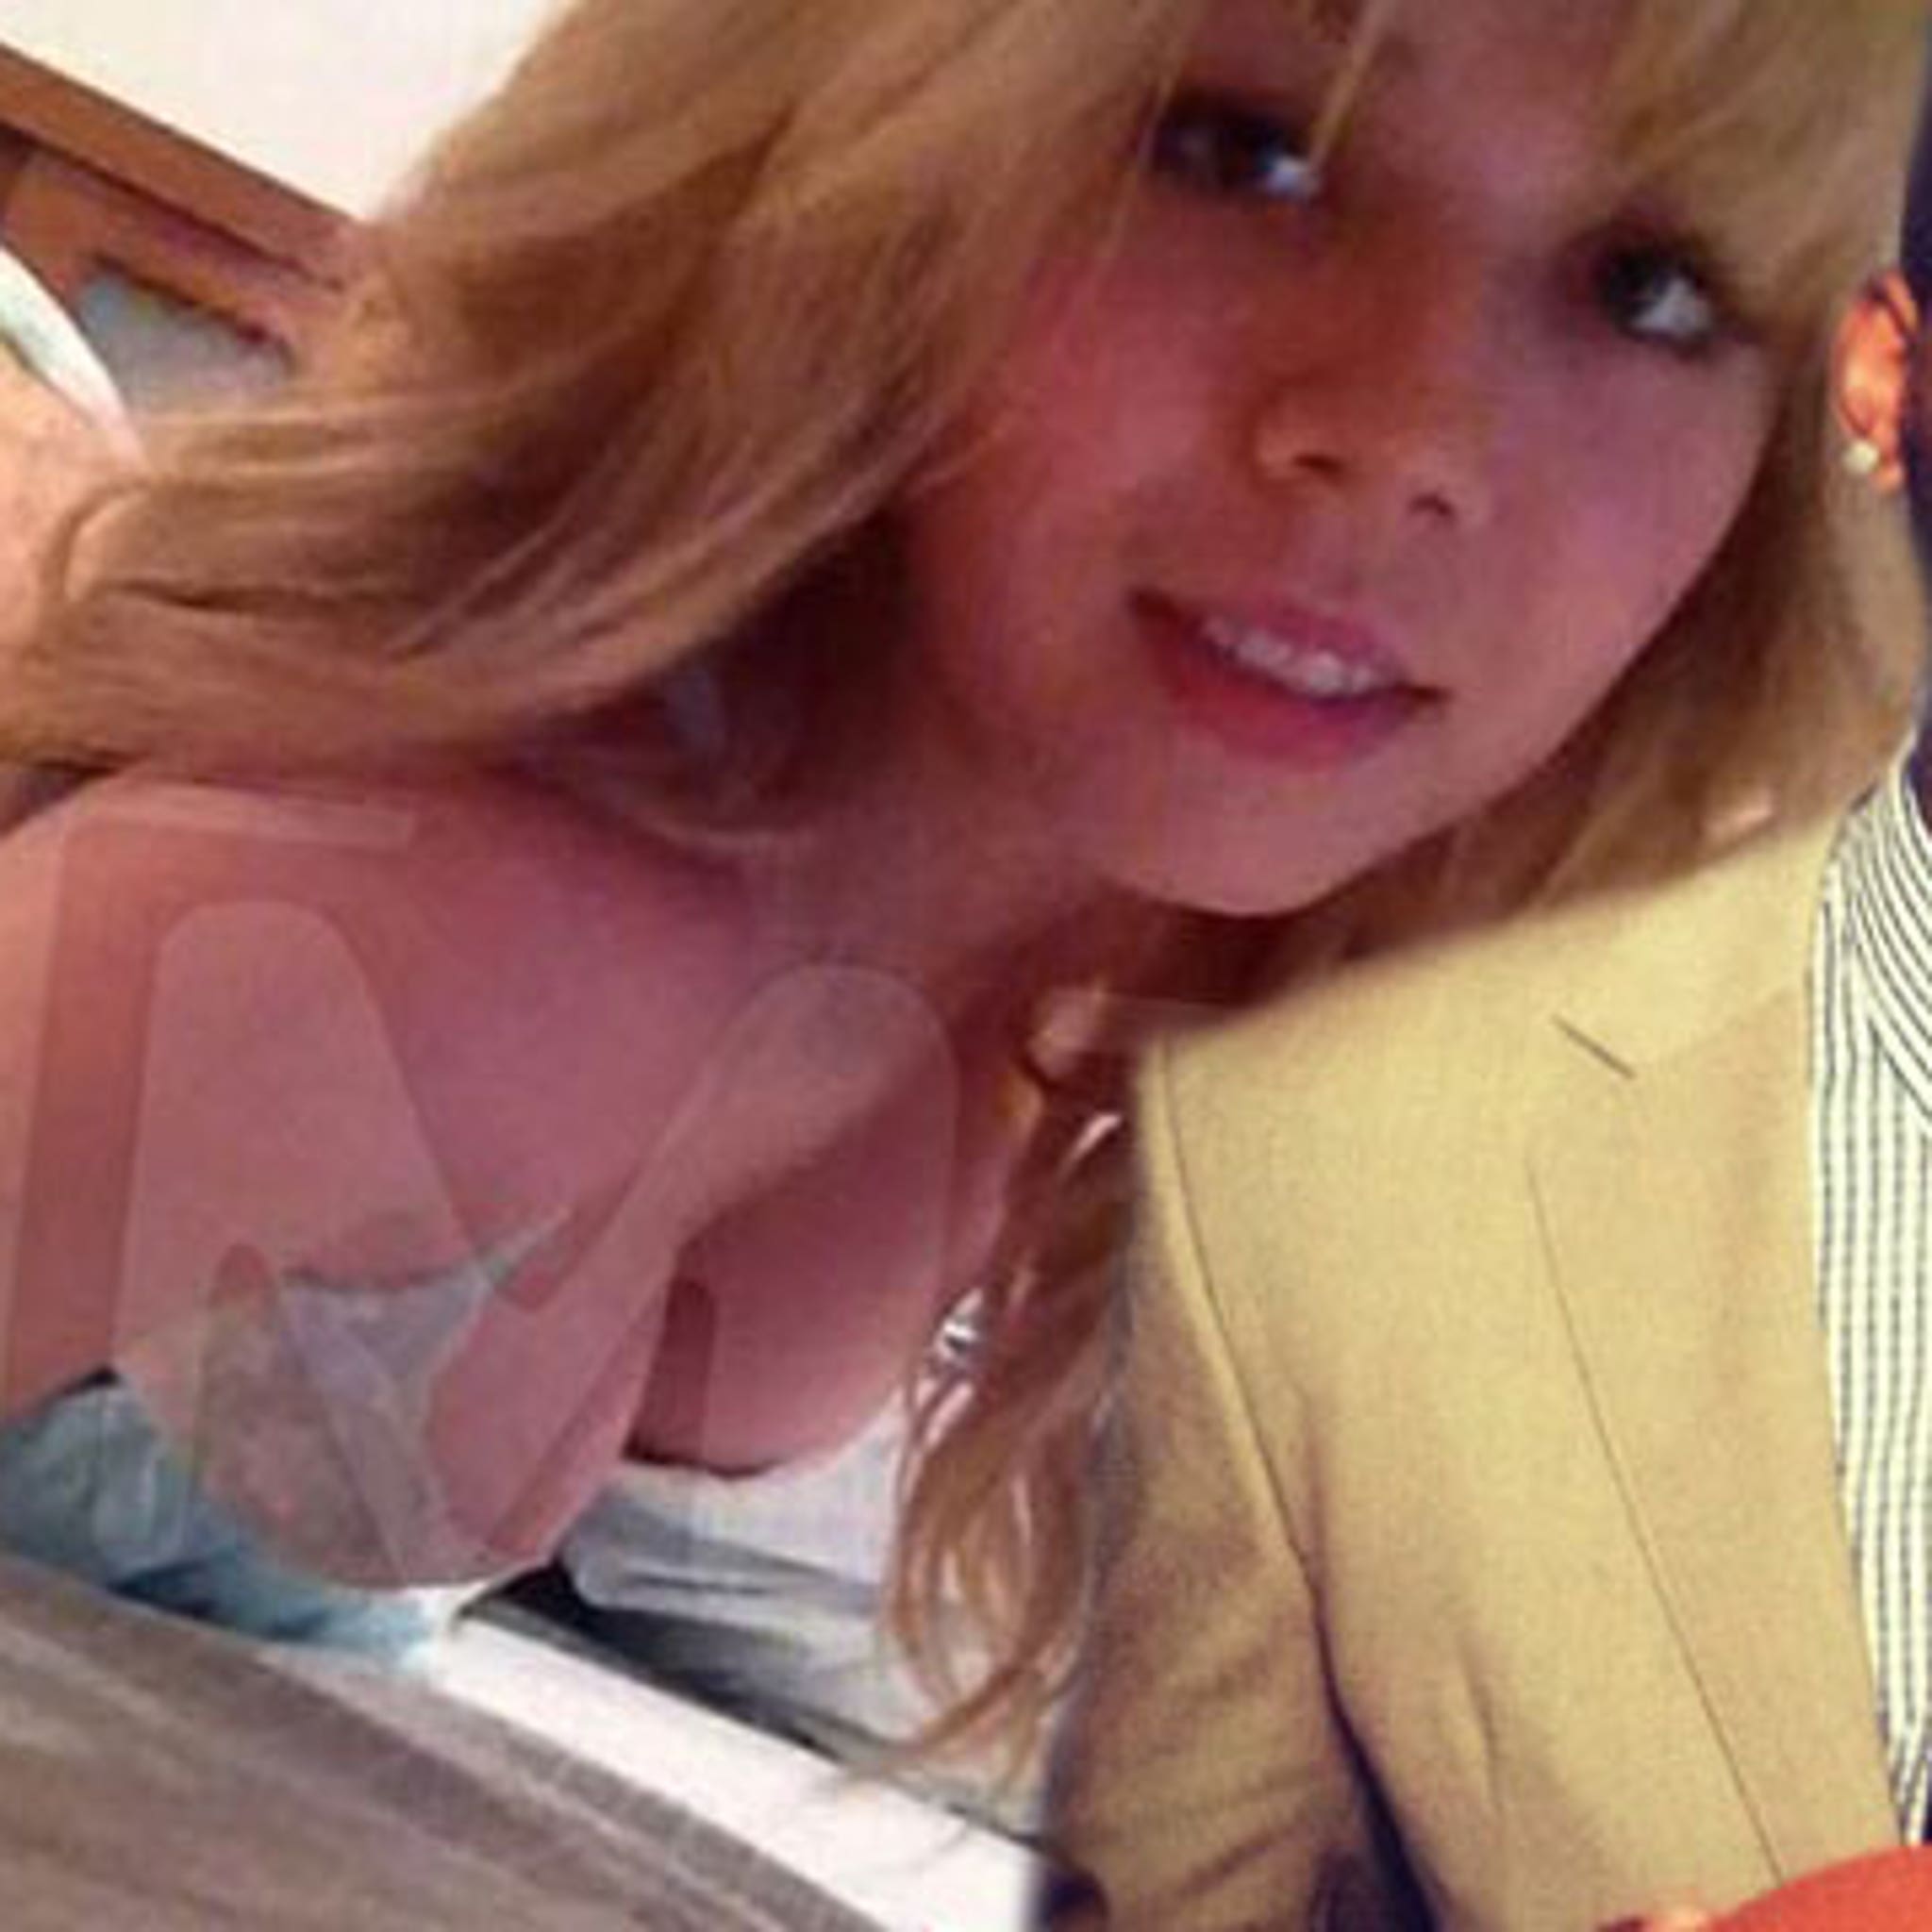 Nudes janette mccurdy leaked Nickelodeon Star